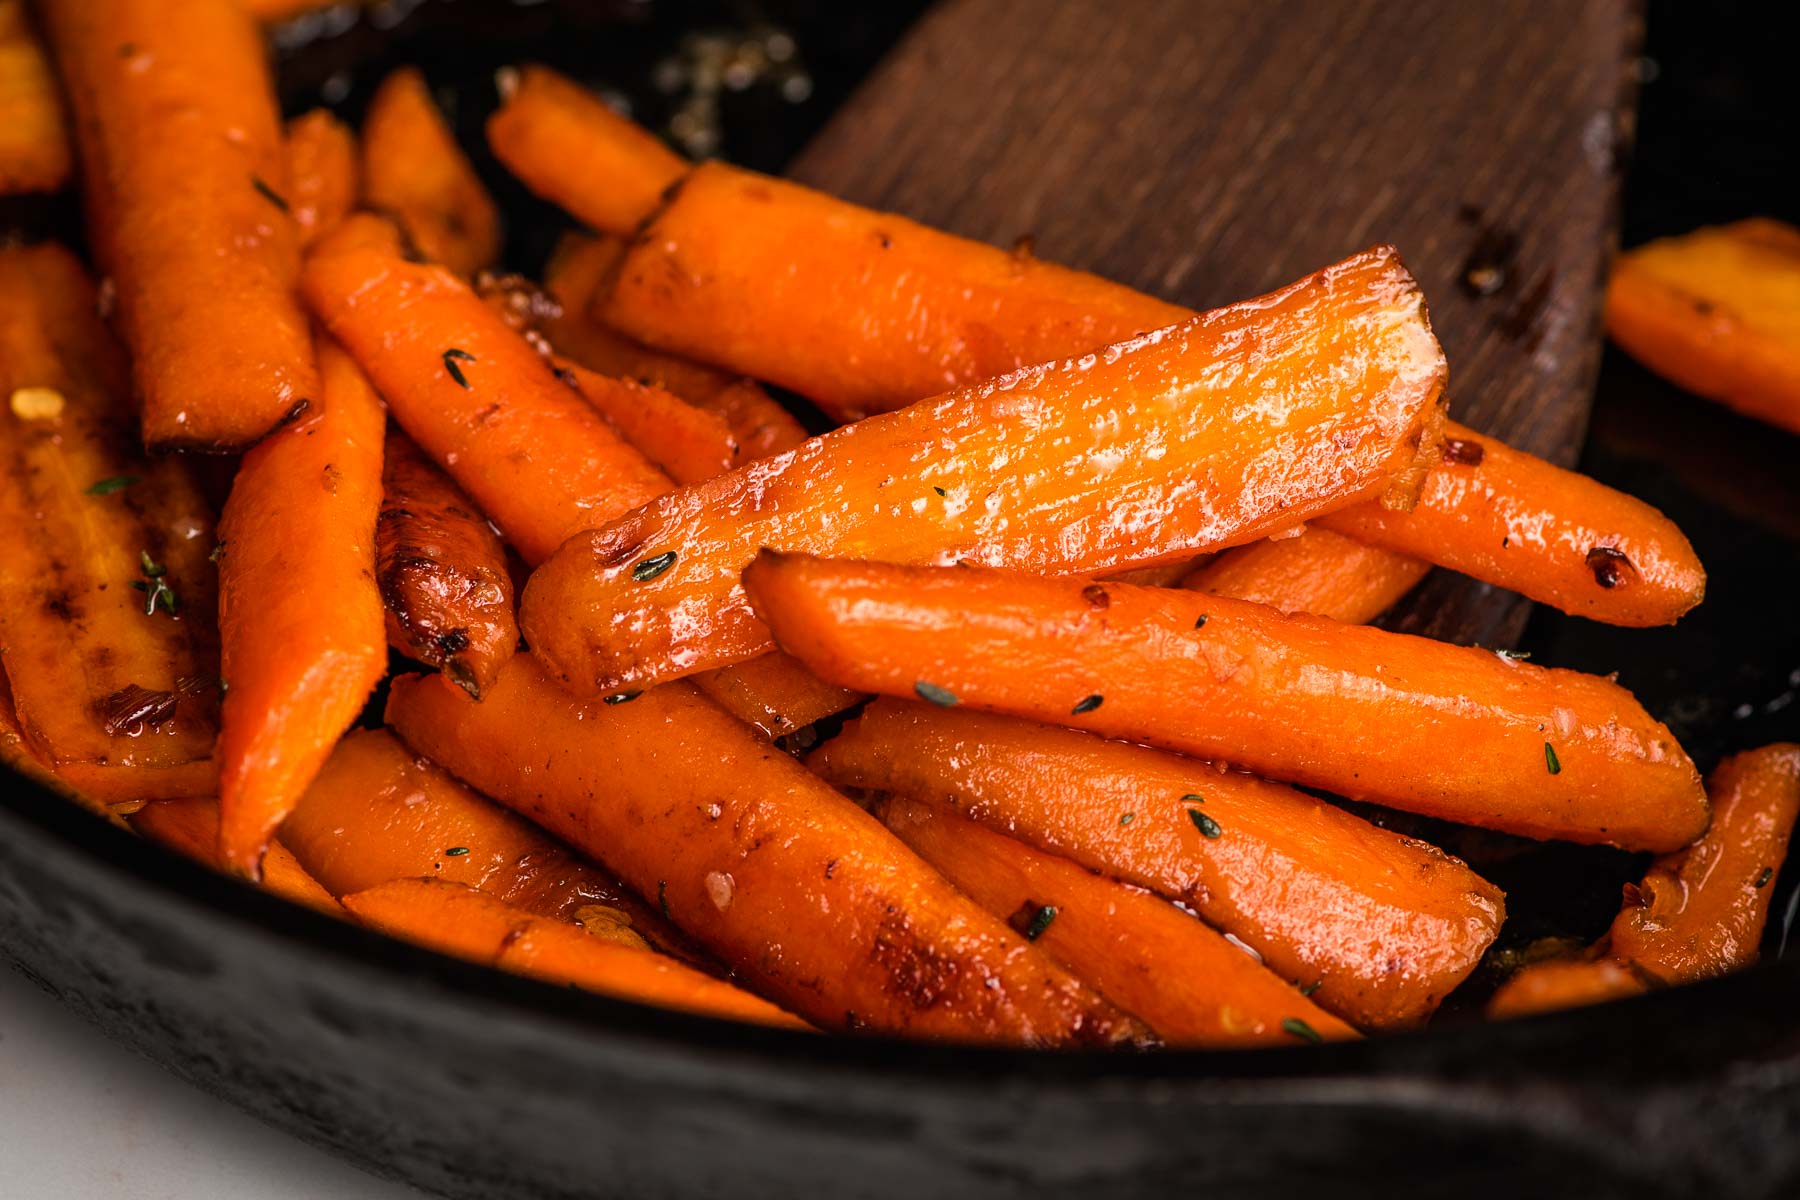 Carrots being sauteed in a skillet